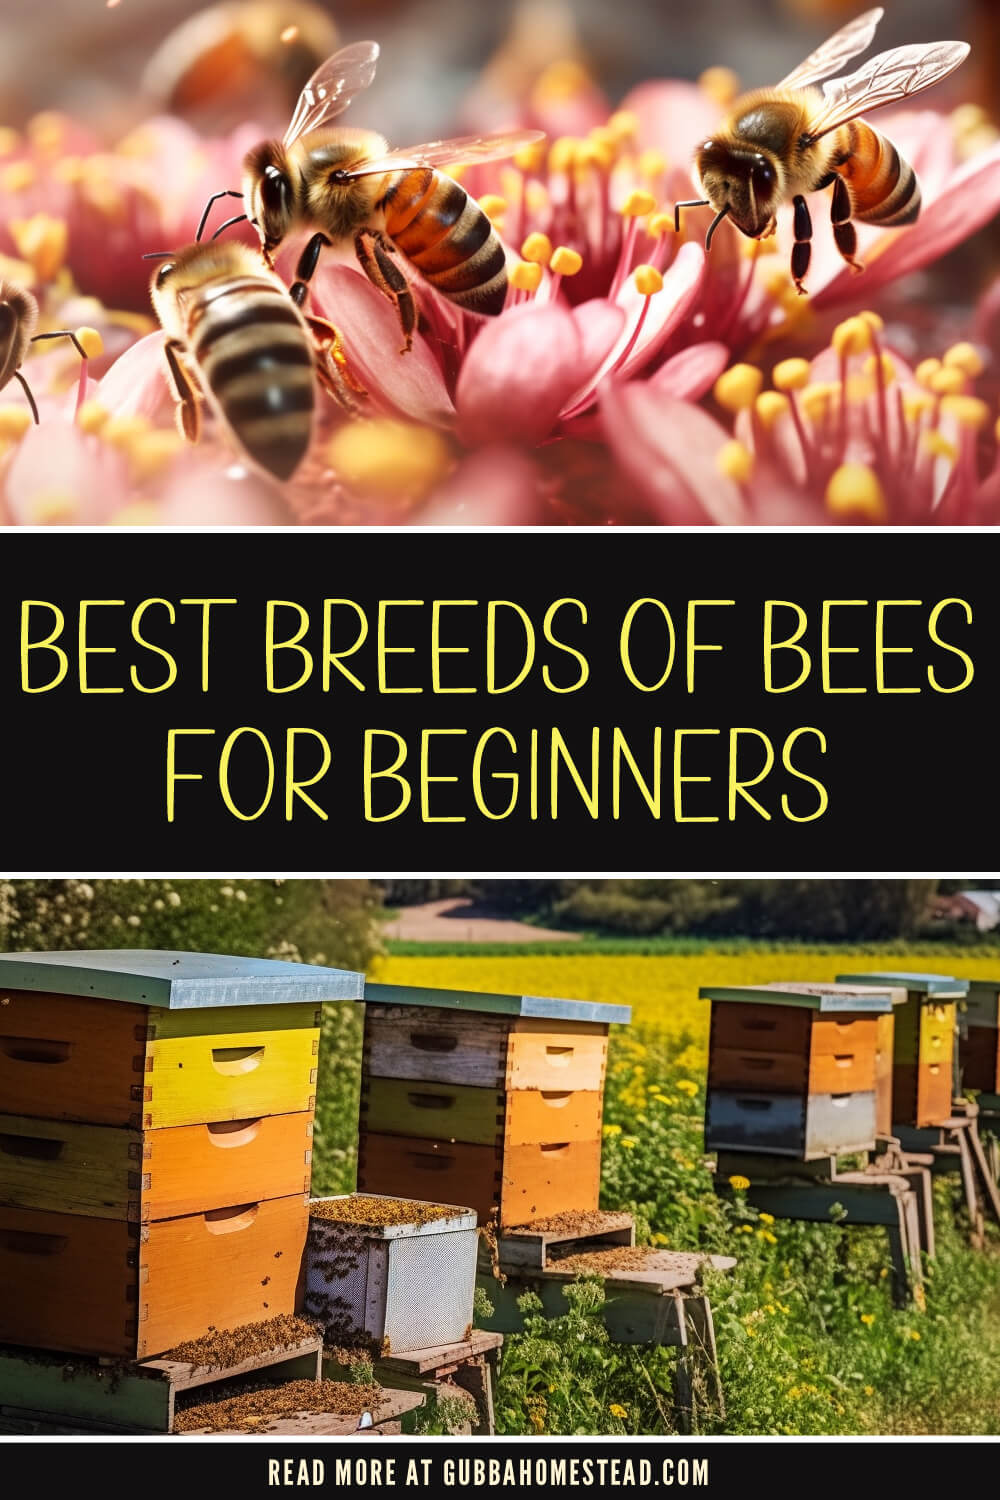 Best Breeds of Bees for Beginners: A Guide to Choosing the Right Bees